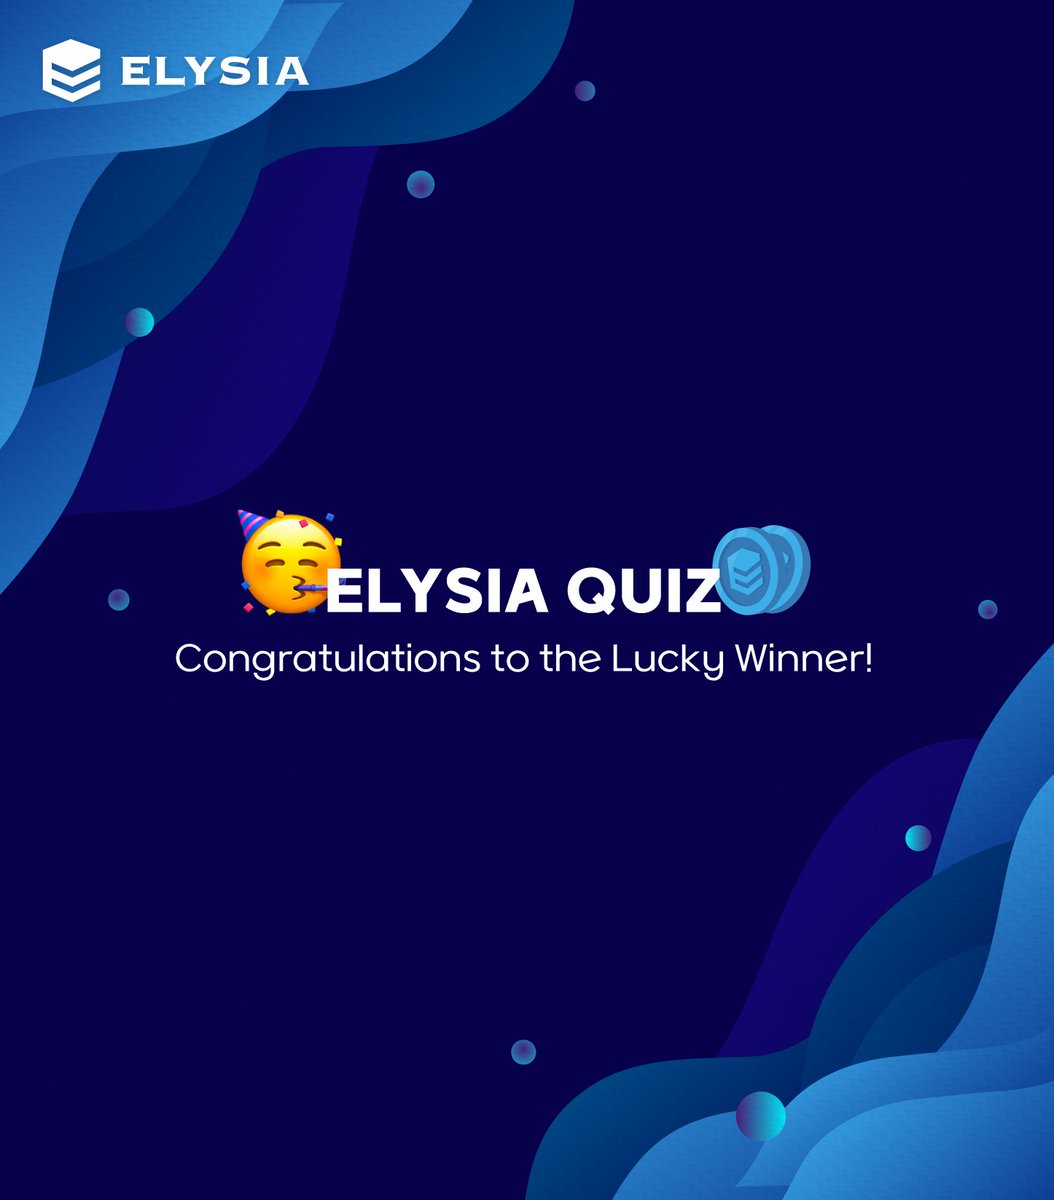 🎉🎉🎉 Congratulations to [5# OxCoolx] for the success in the ELYQUIZ! You have won $25 worth of ELFI tokens! 💰 We thank all participants who made this contest possible. 😃🙌🏽 Stay tuned for more updates from #ELYSIA! 🚀